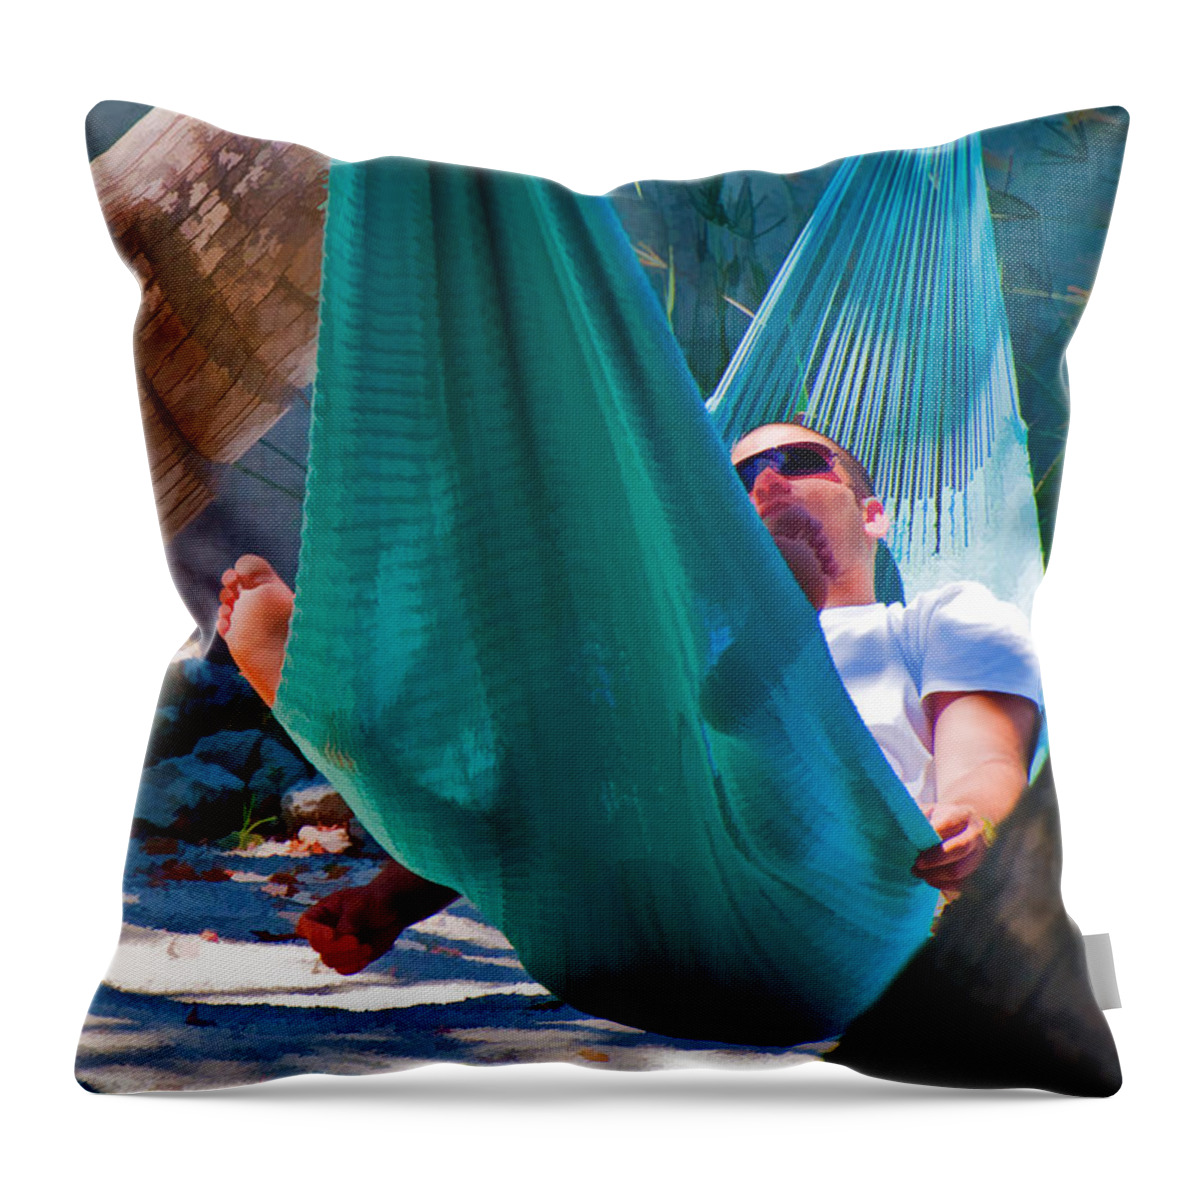 Relaxing Throw Pillow featuring the photograph Island Hammock Time by Ginger Wakem